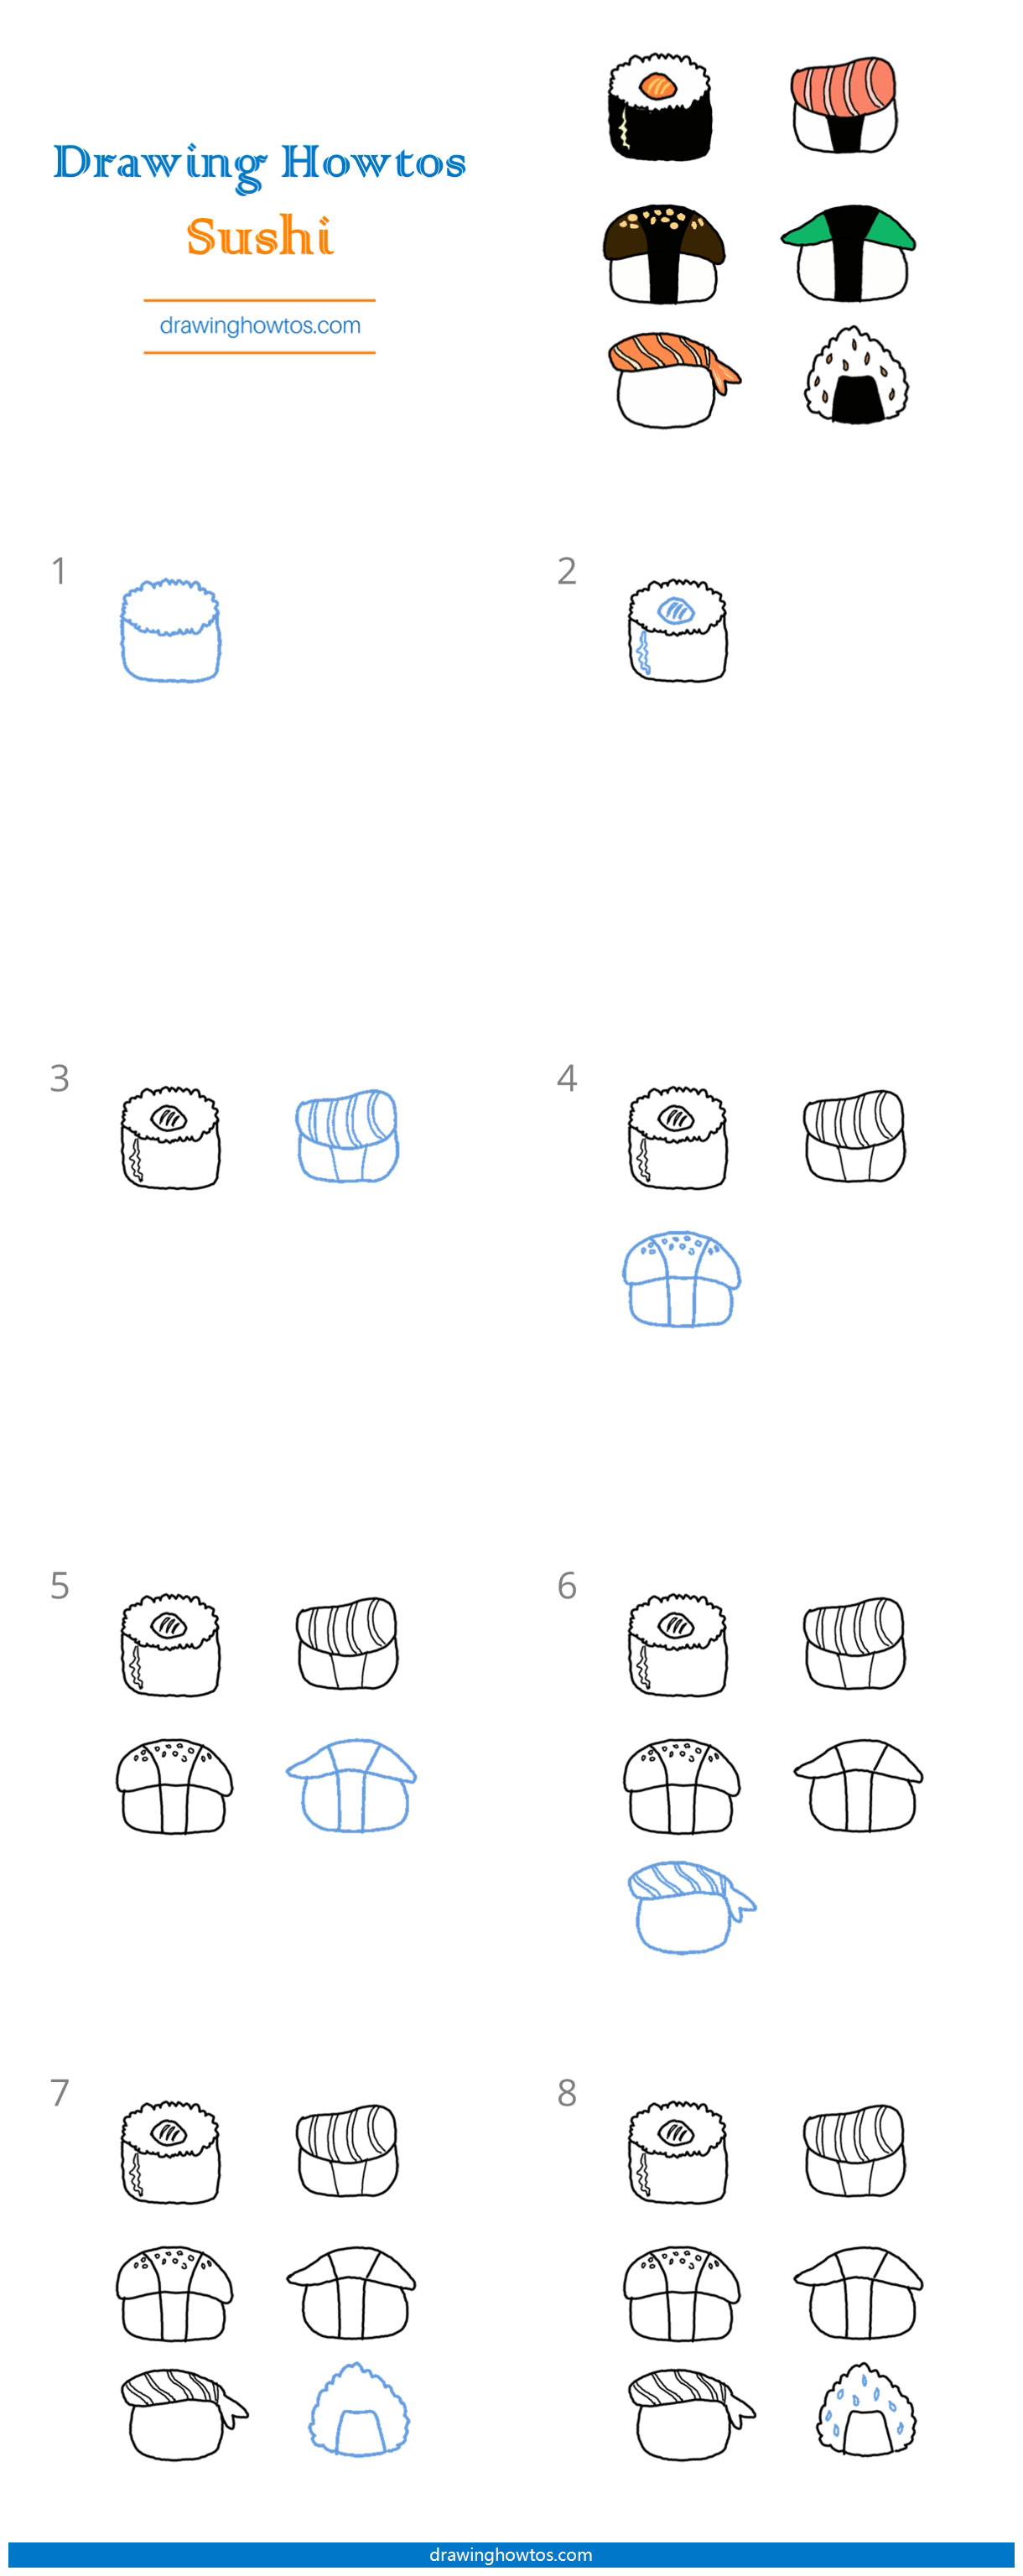 How to Draw Sushi Step by Step